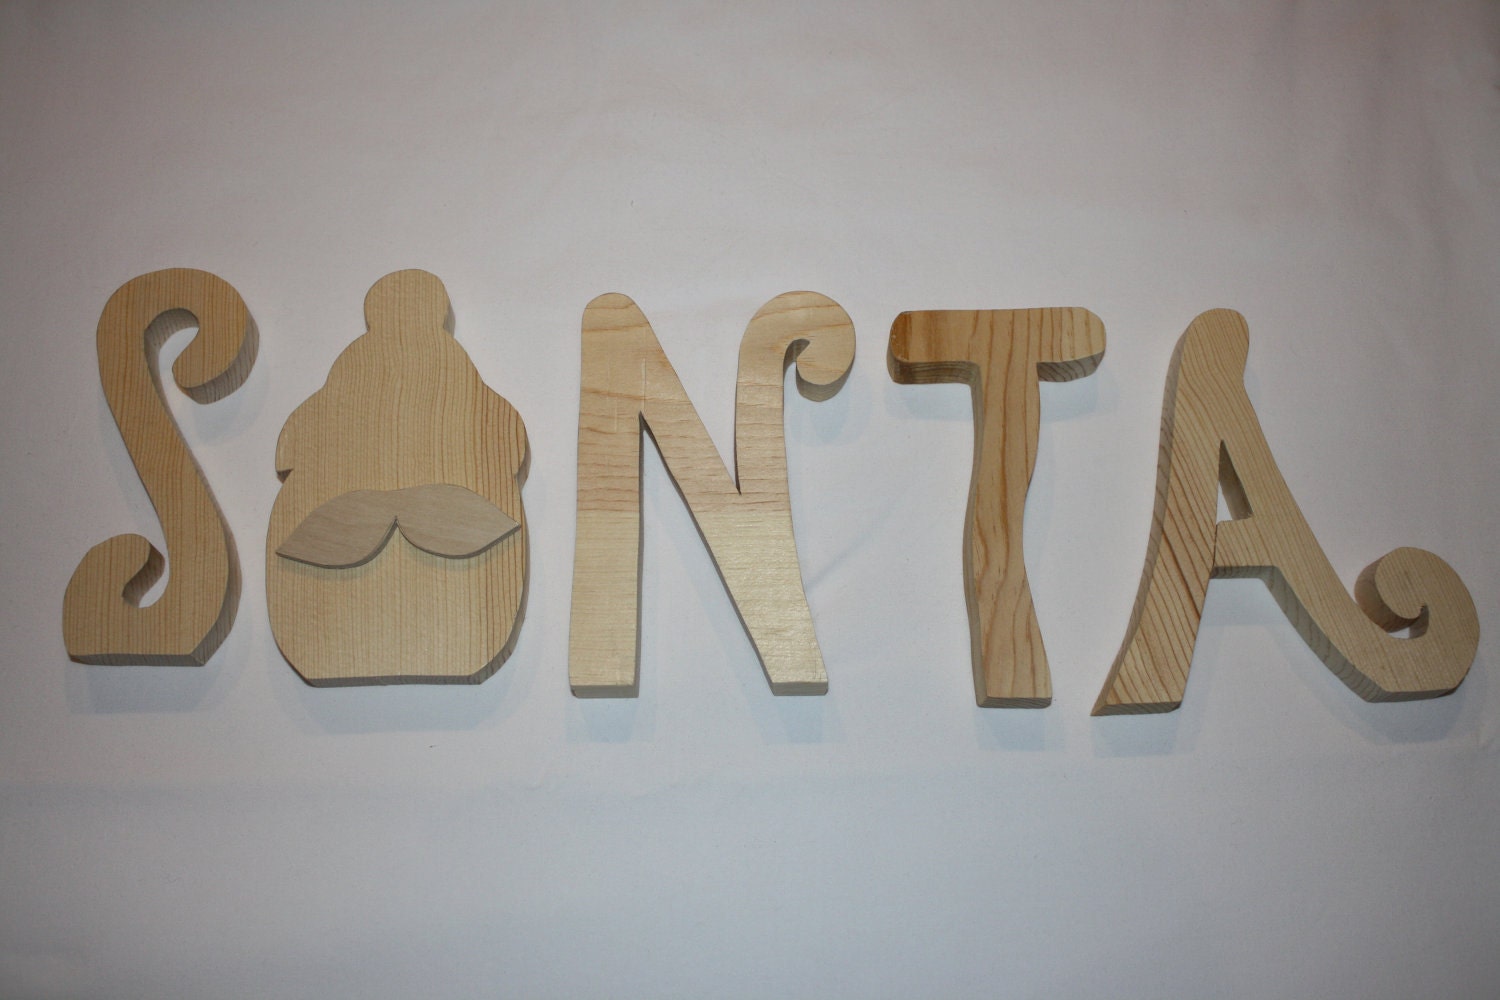 Santa unfinished wood word to decorate you home for the season